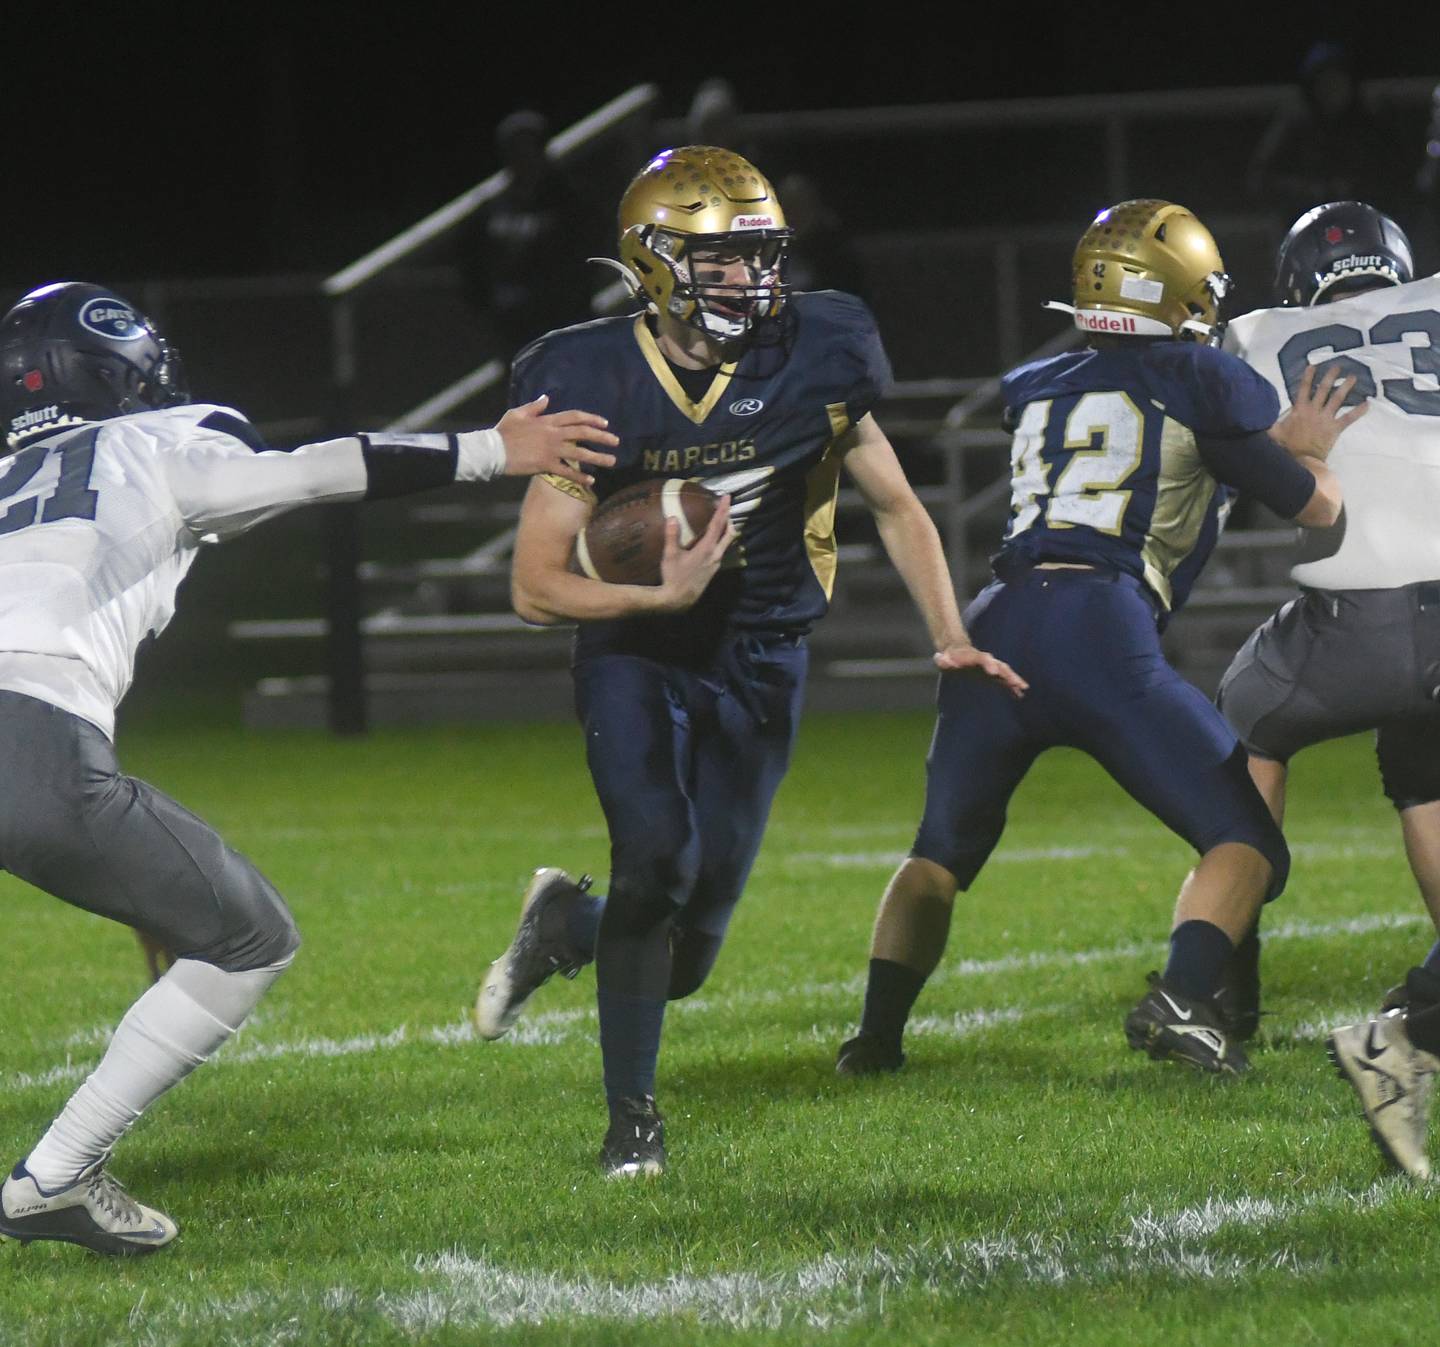 Polo's Brock Soltow runs for yards against River Ridge on Friday, Oct. 7.